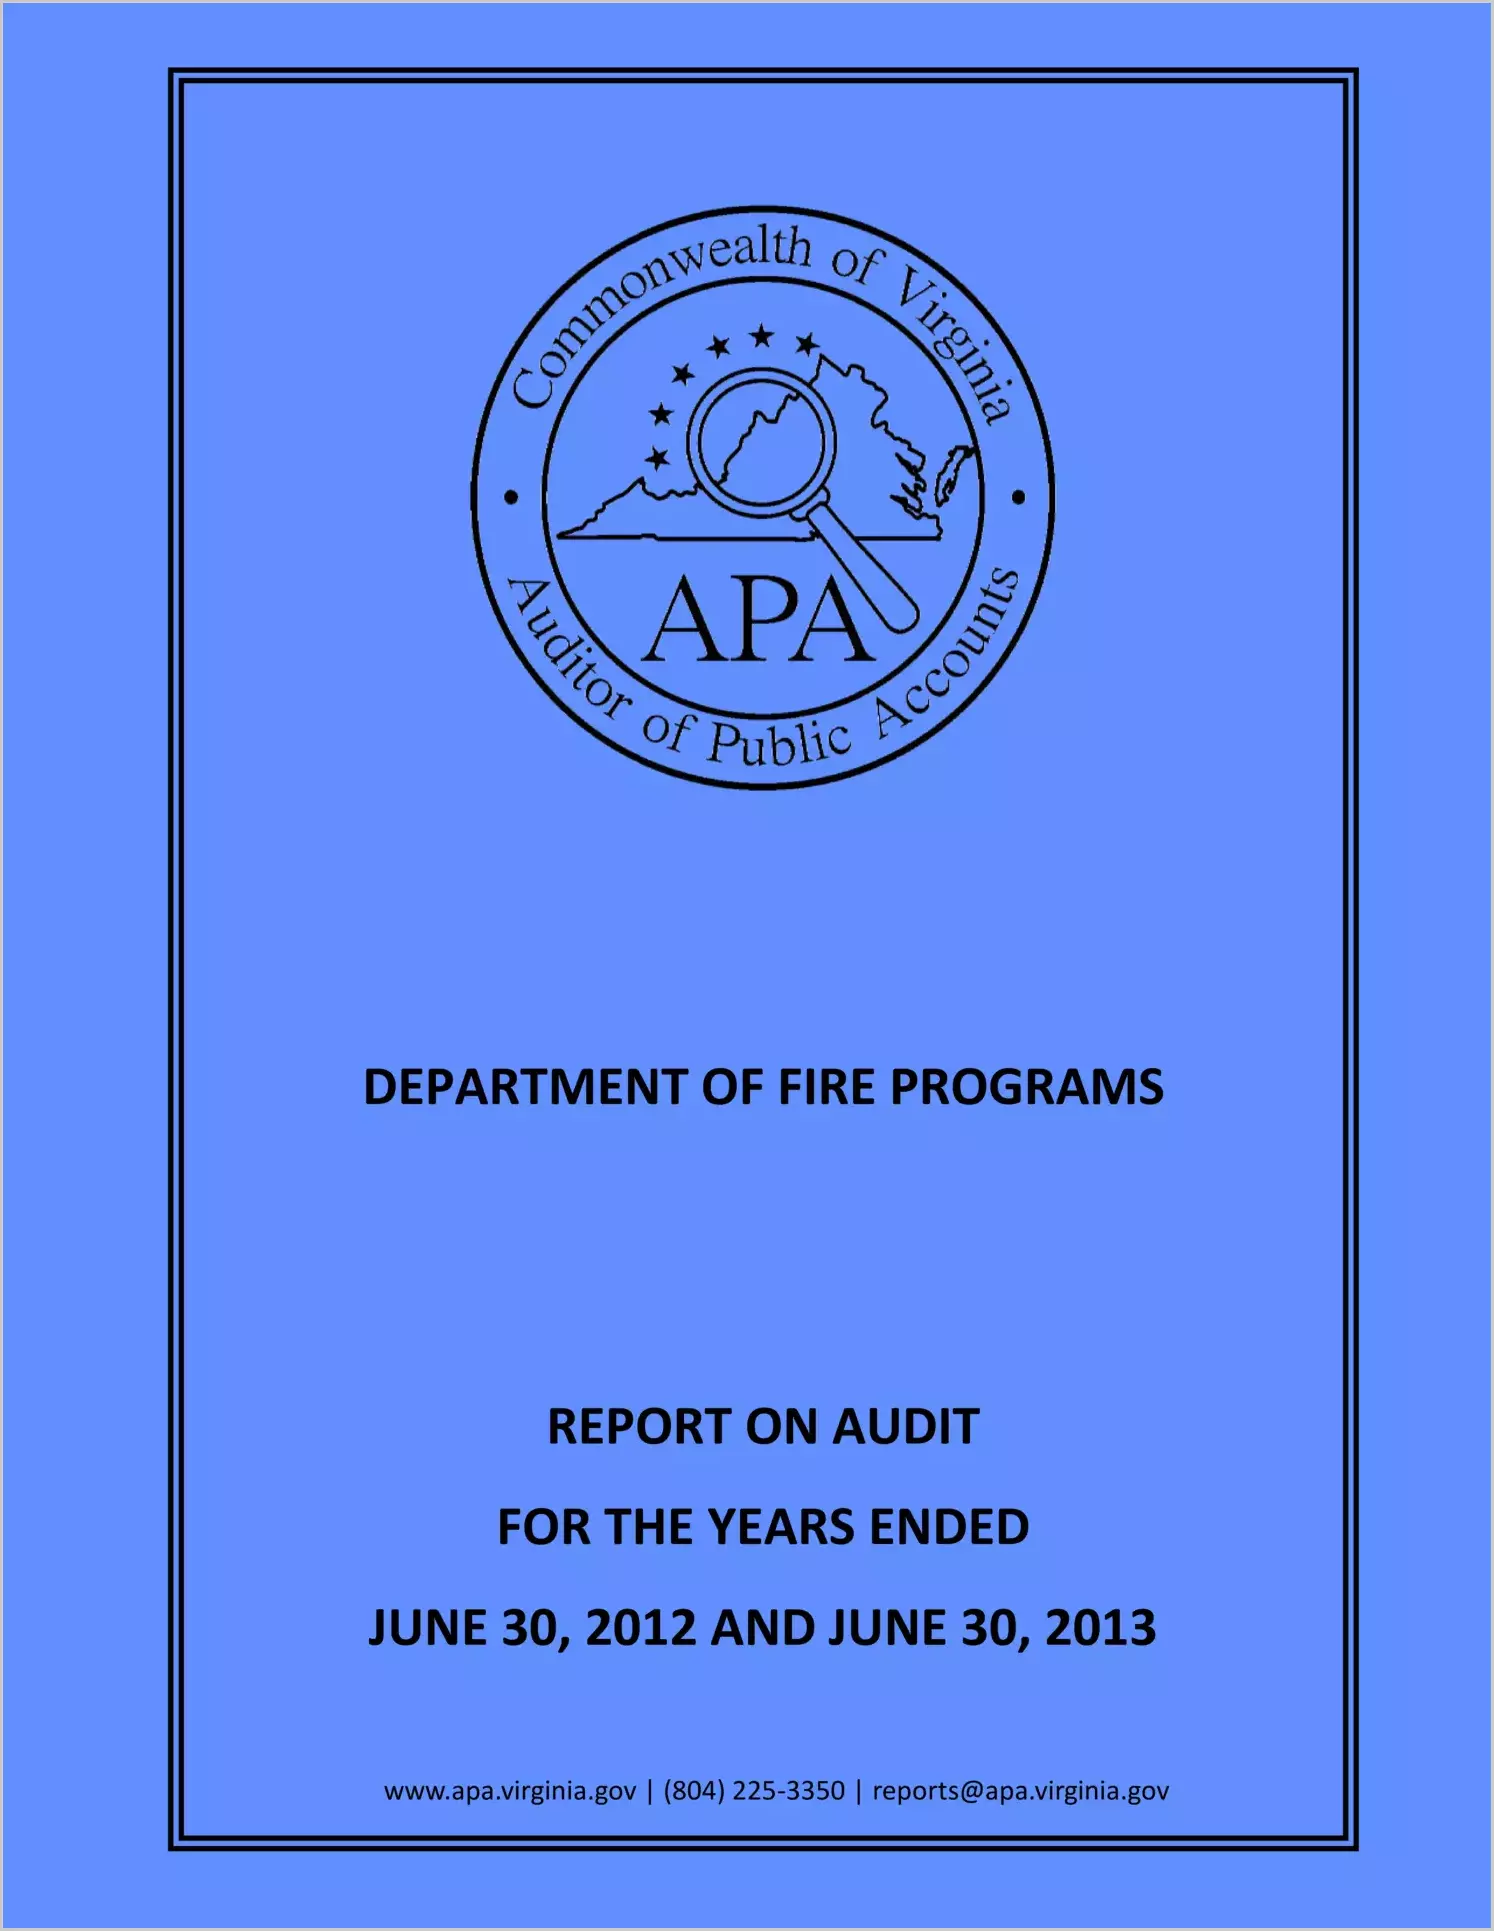 Department of Fire Programs for the years ended June 30, 2012 and June 30, 2013